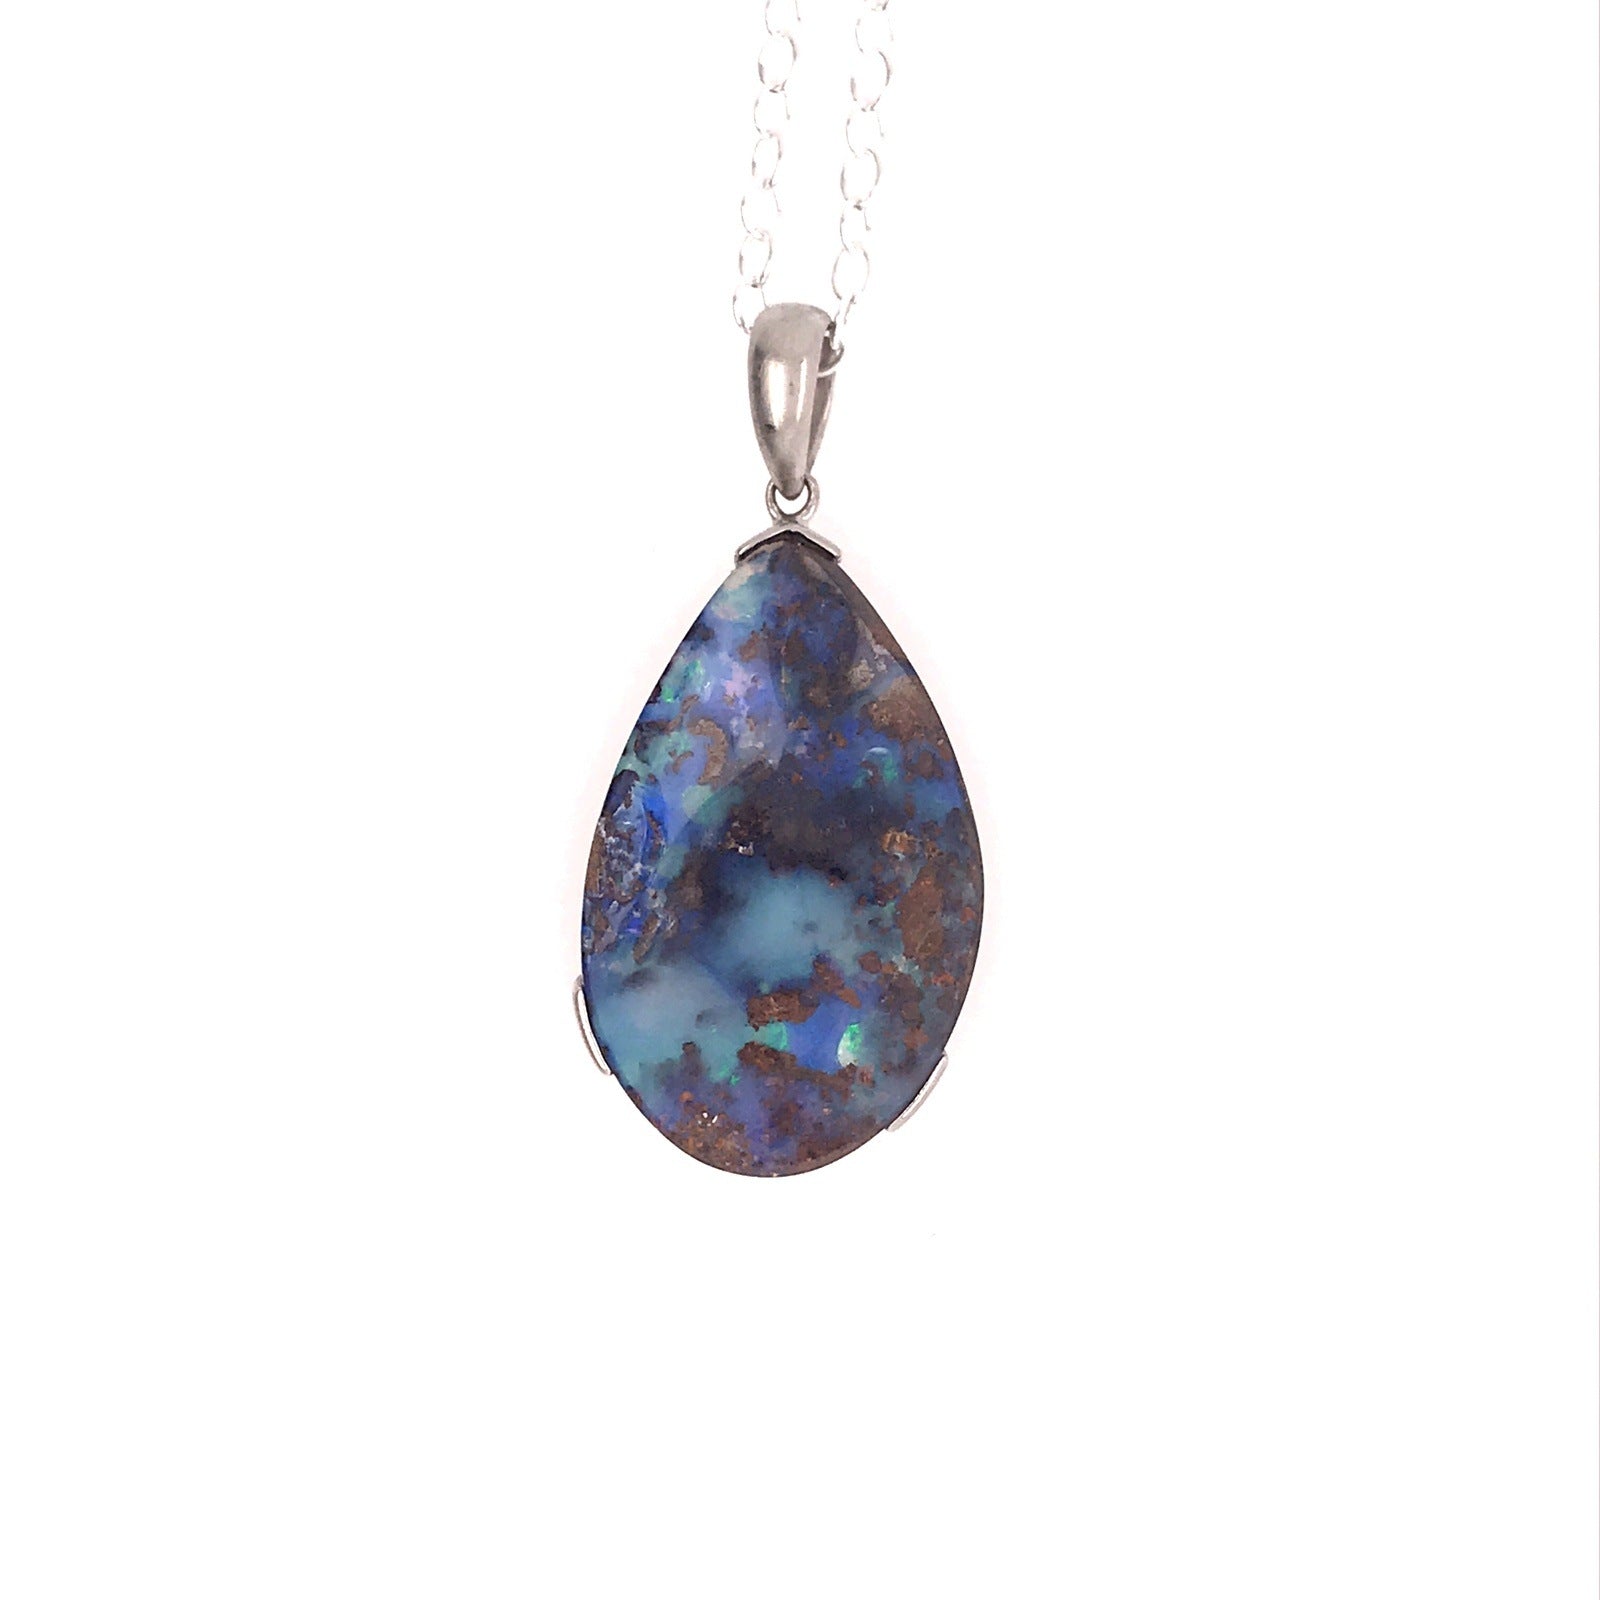 Bring Out the Blue Opal Necklace - Sheila Marie Opals